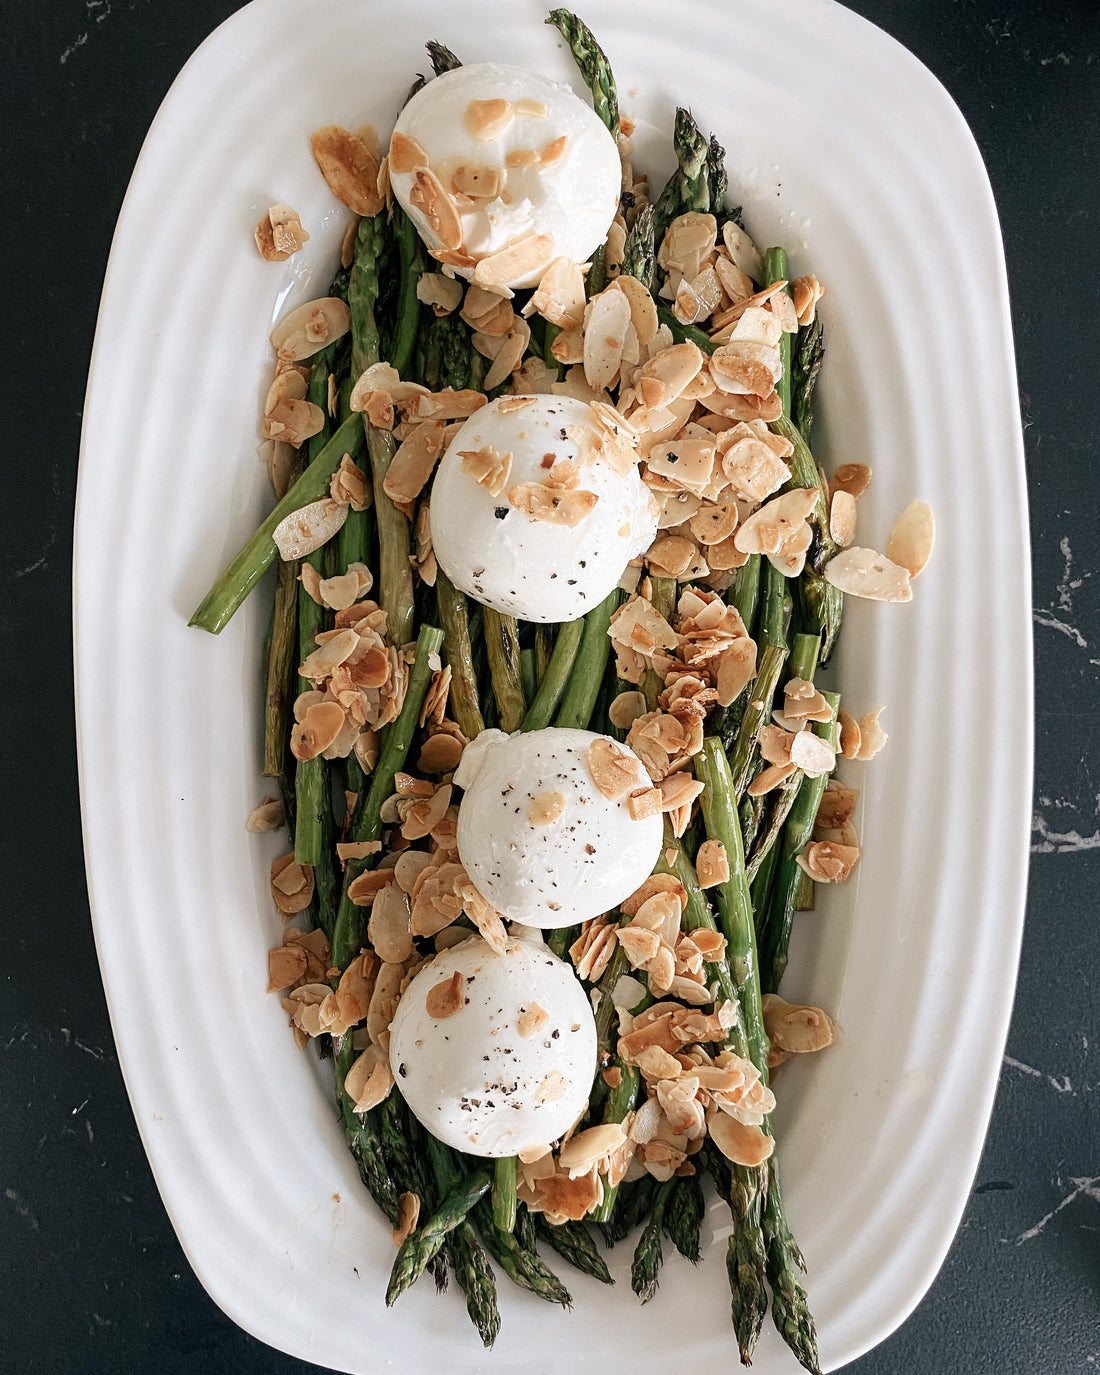 asparagus salad with burrata, almonds, and maple syrup dressing